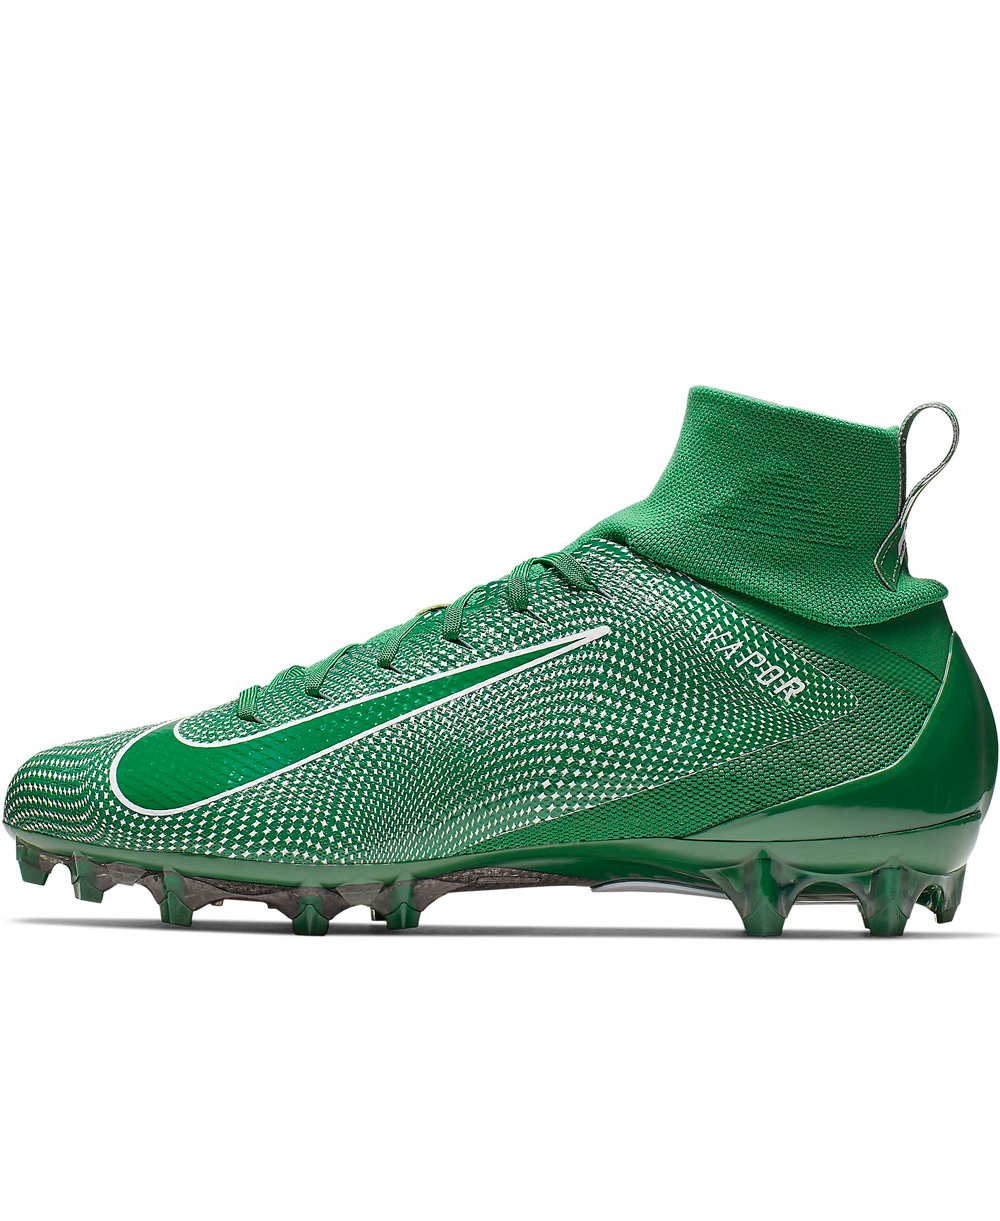 green and white football cleats